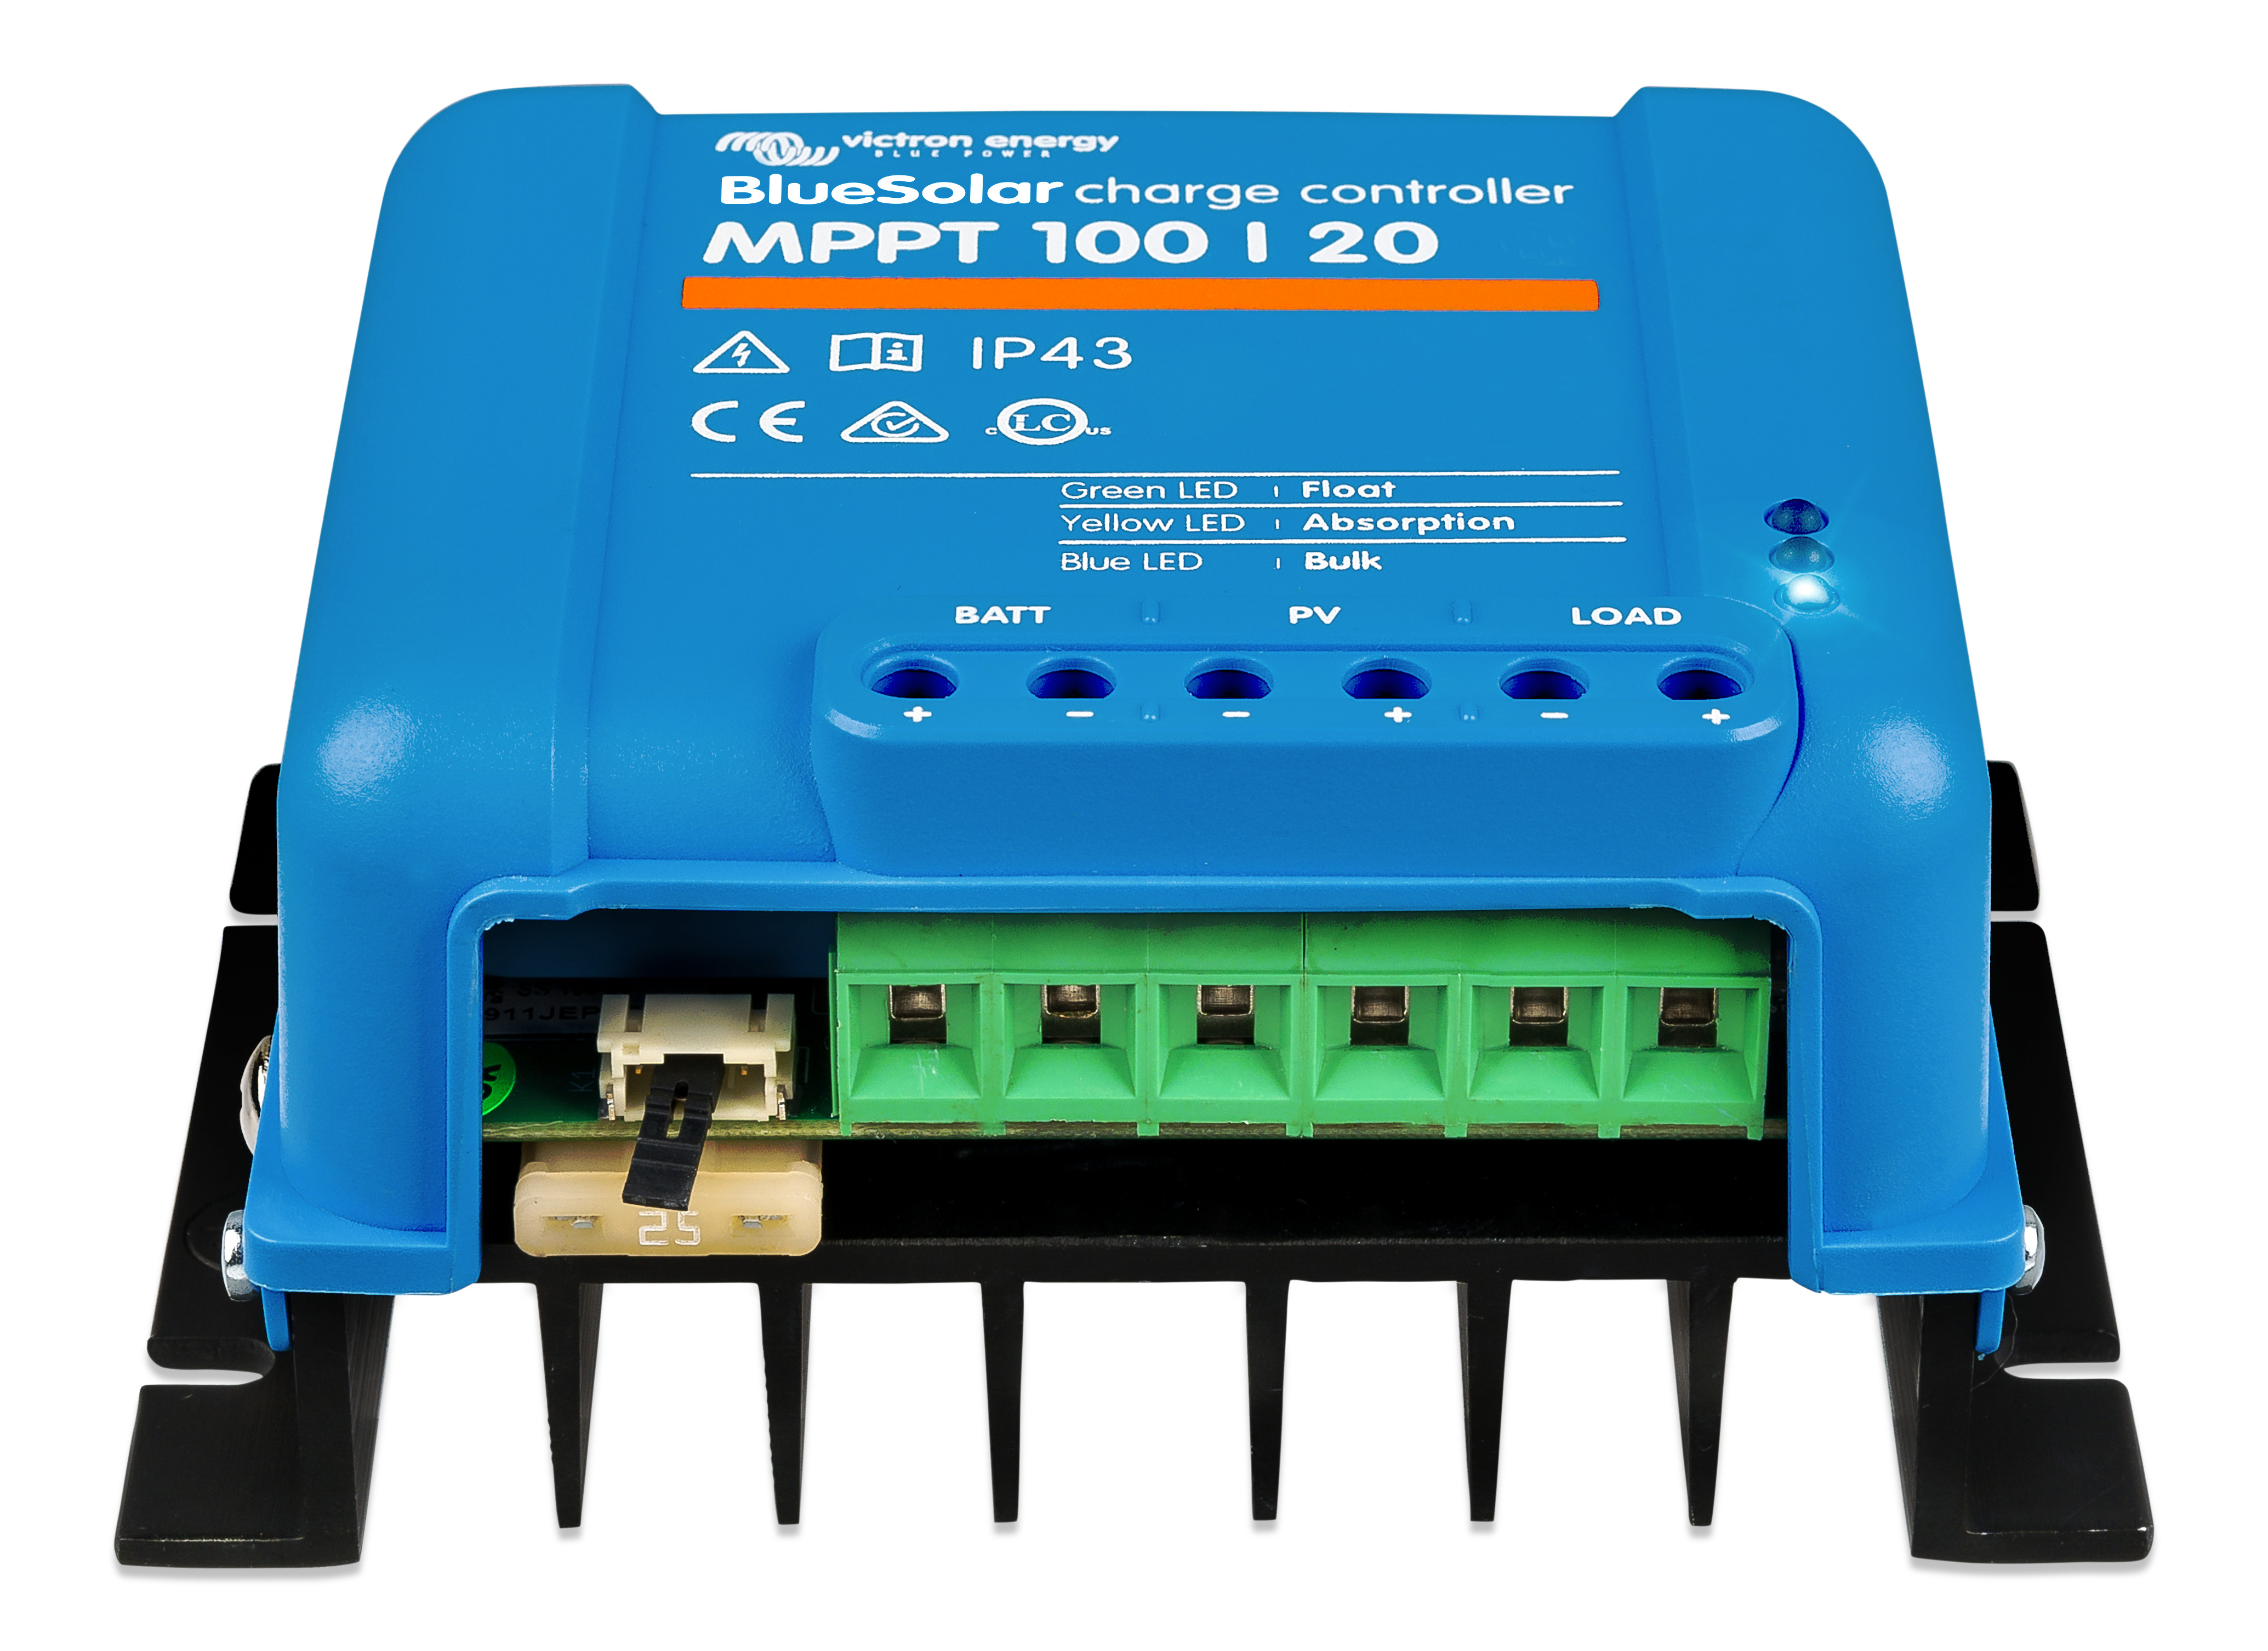 40 A Victron Energy MPPT 75 Solar Charge Controller at Rs 14224 in Bengaluru